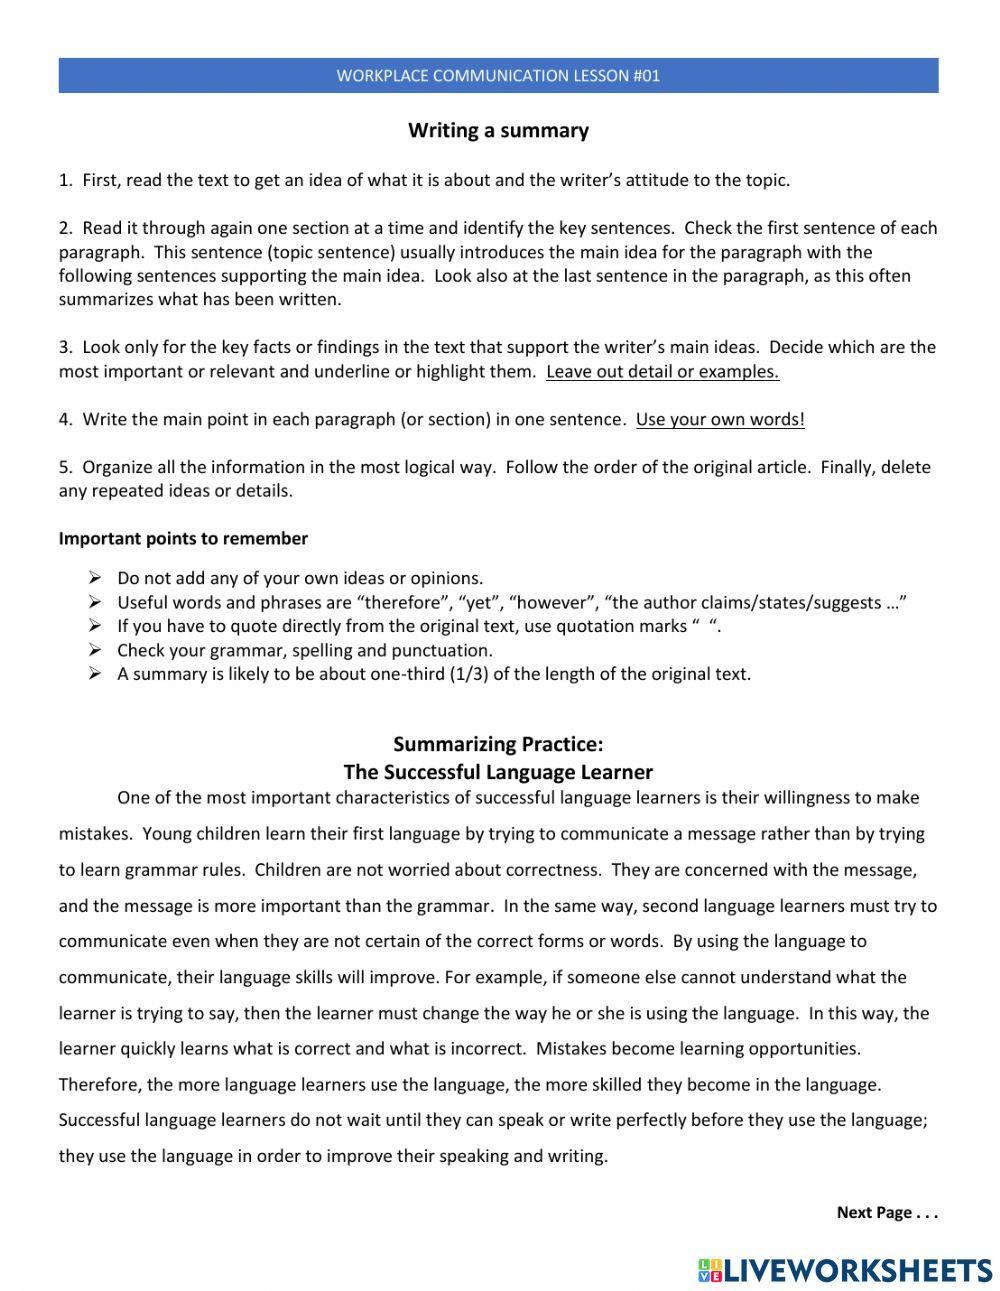 WC Lesson 01 - Writing a Summary